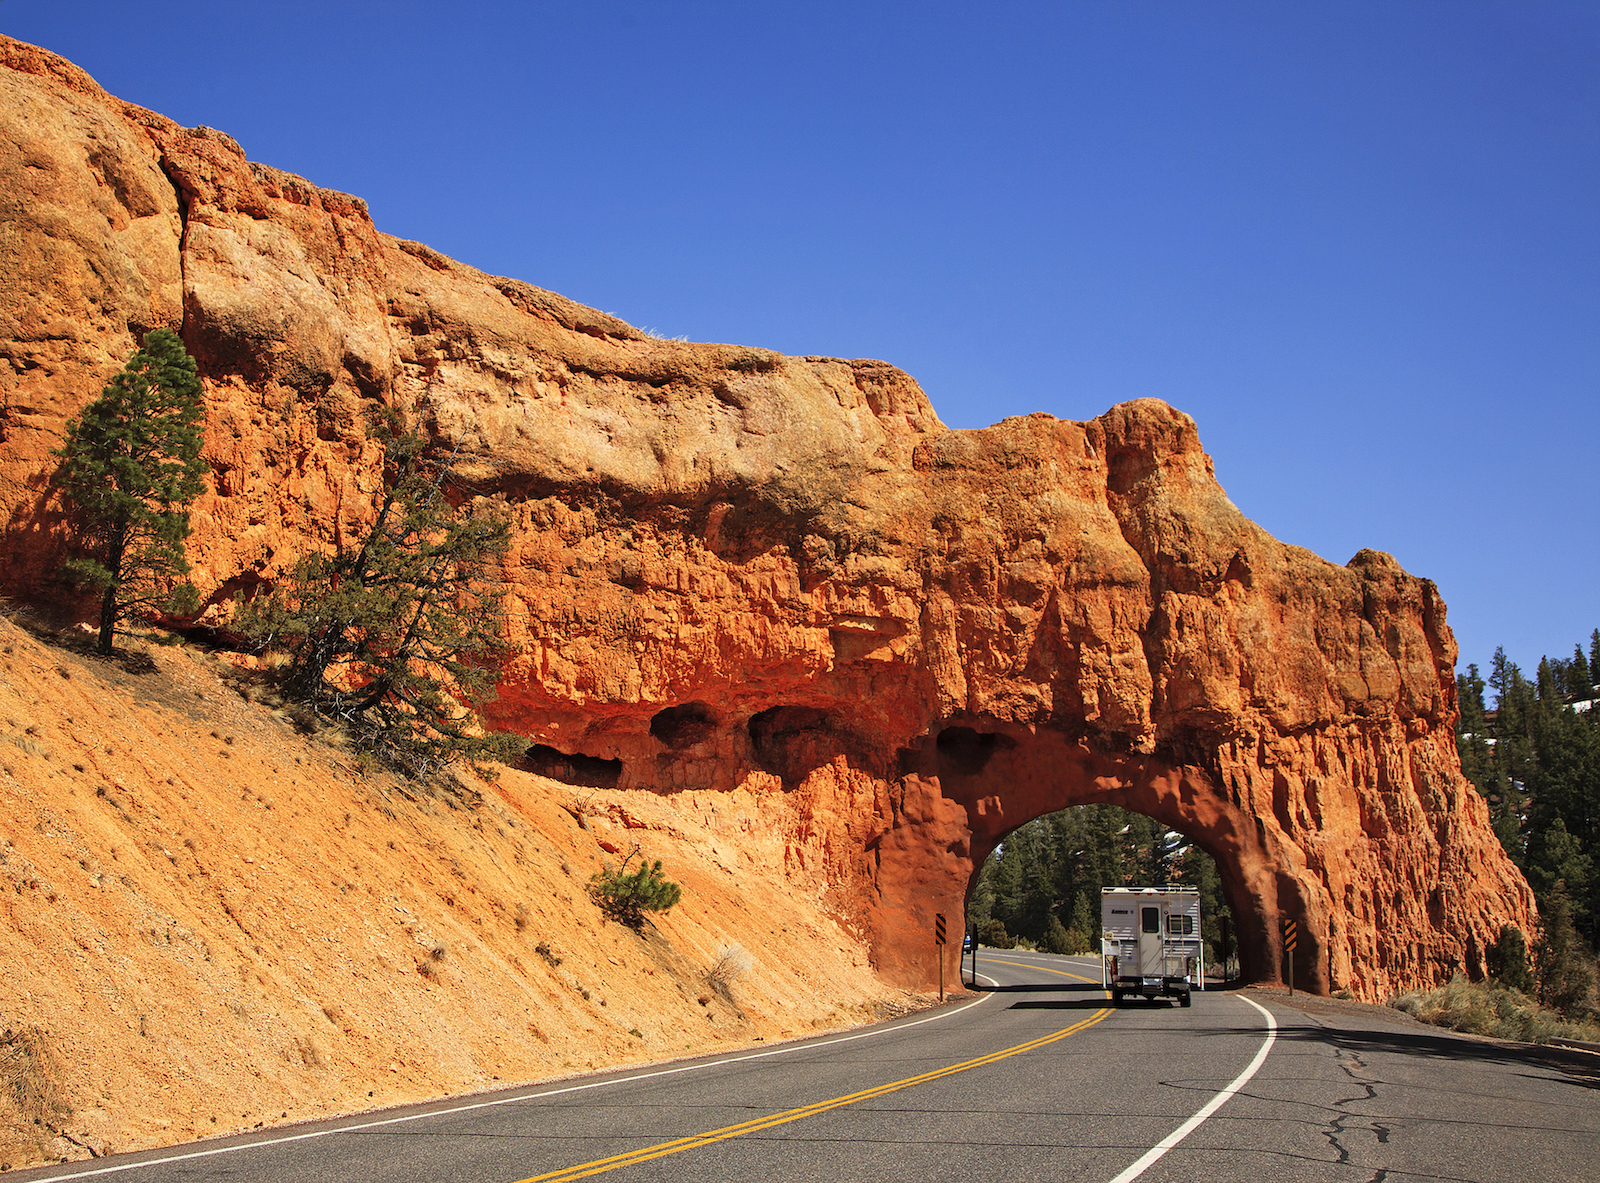 Truck with camper on Highway 12 Scenic Bypass in Utah